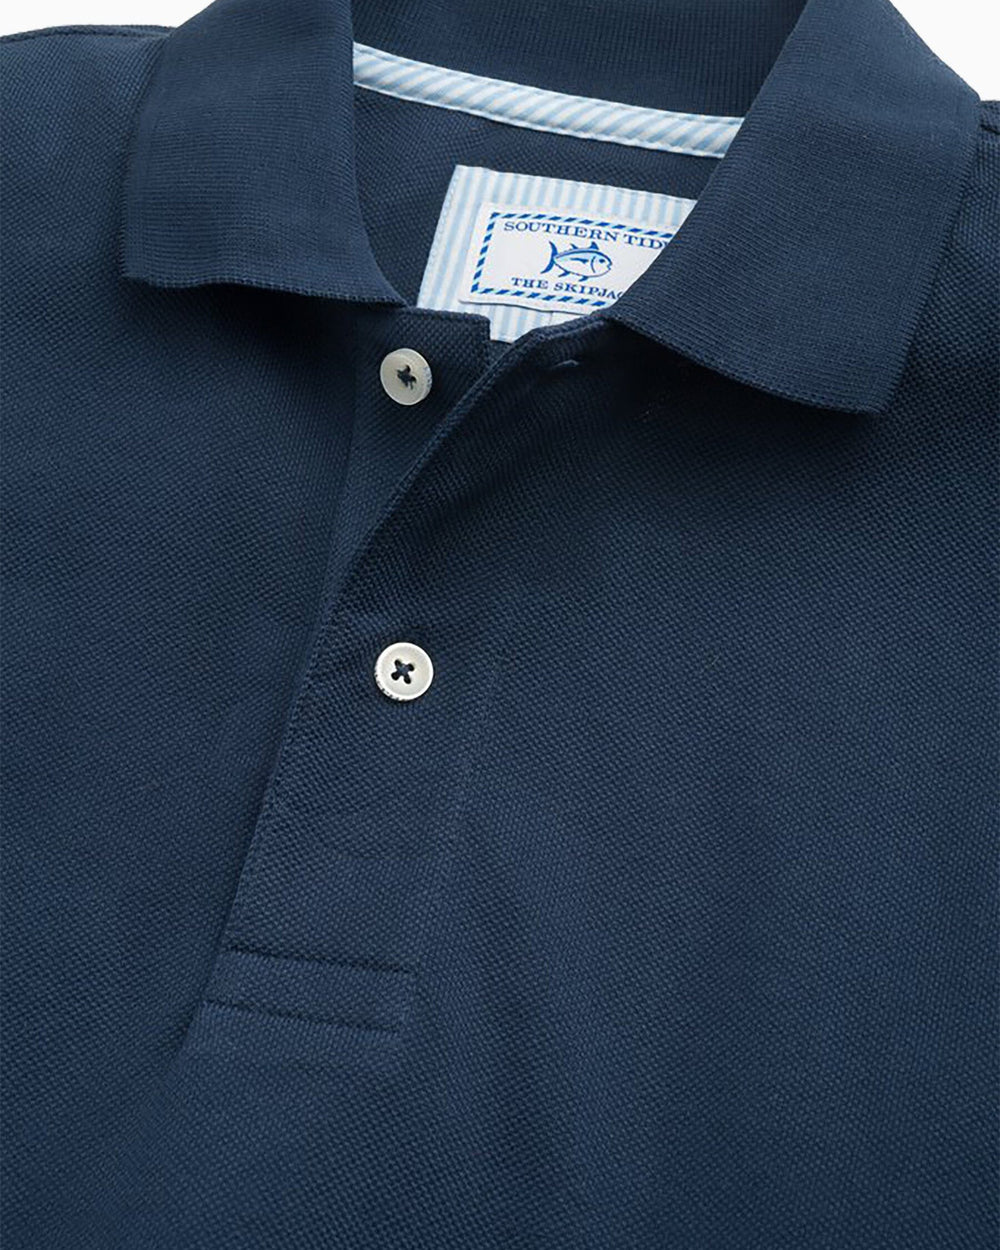 The detail view of the Men's Orange Skipjack Gameday Colors Polo Shirt by Southern Tide - Navy